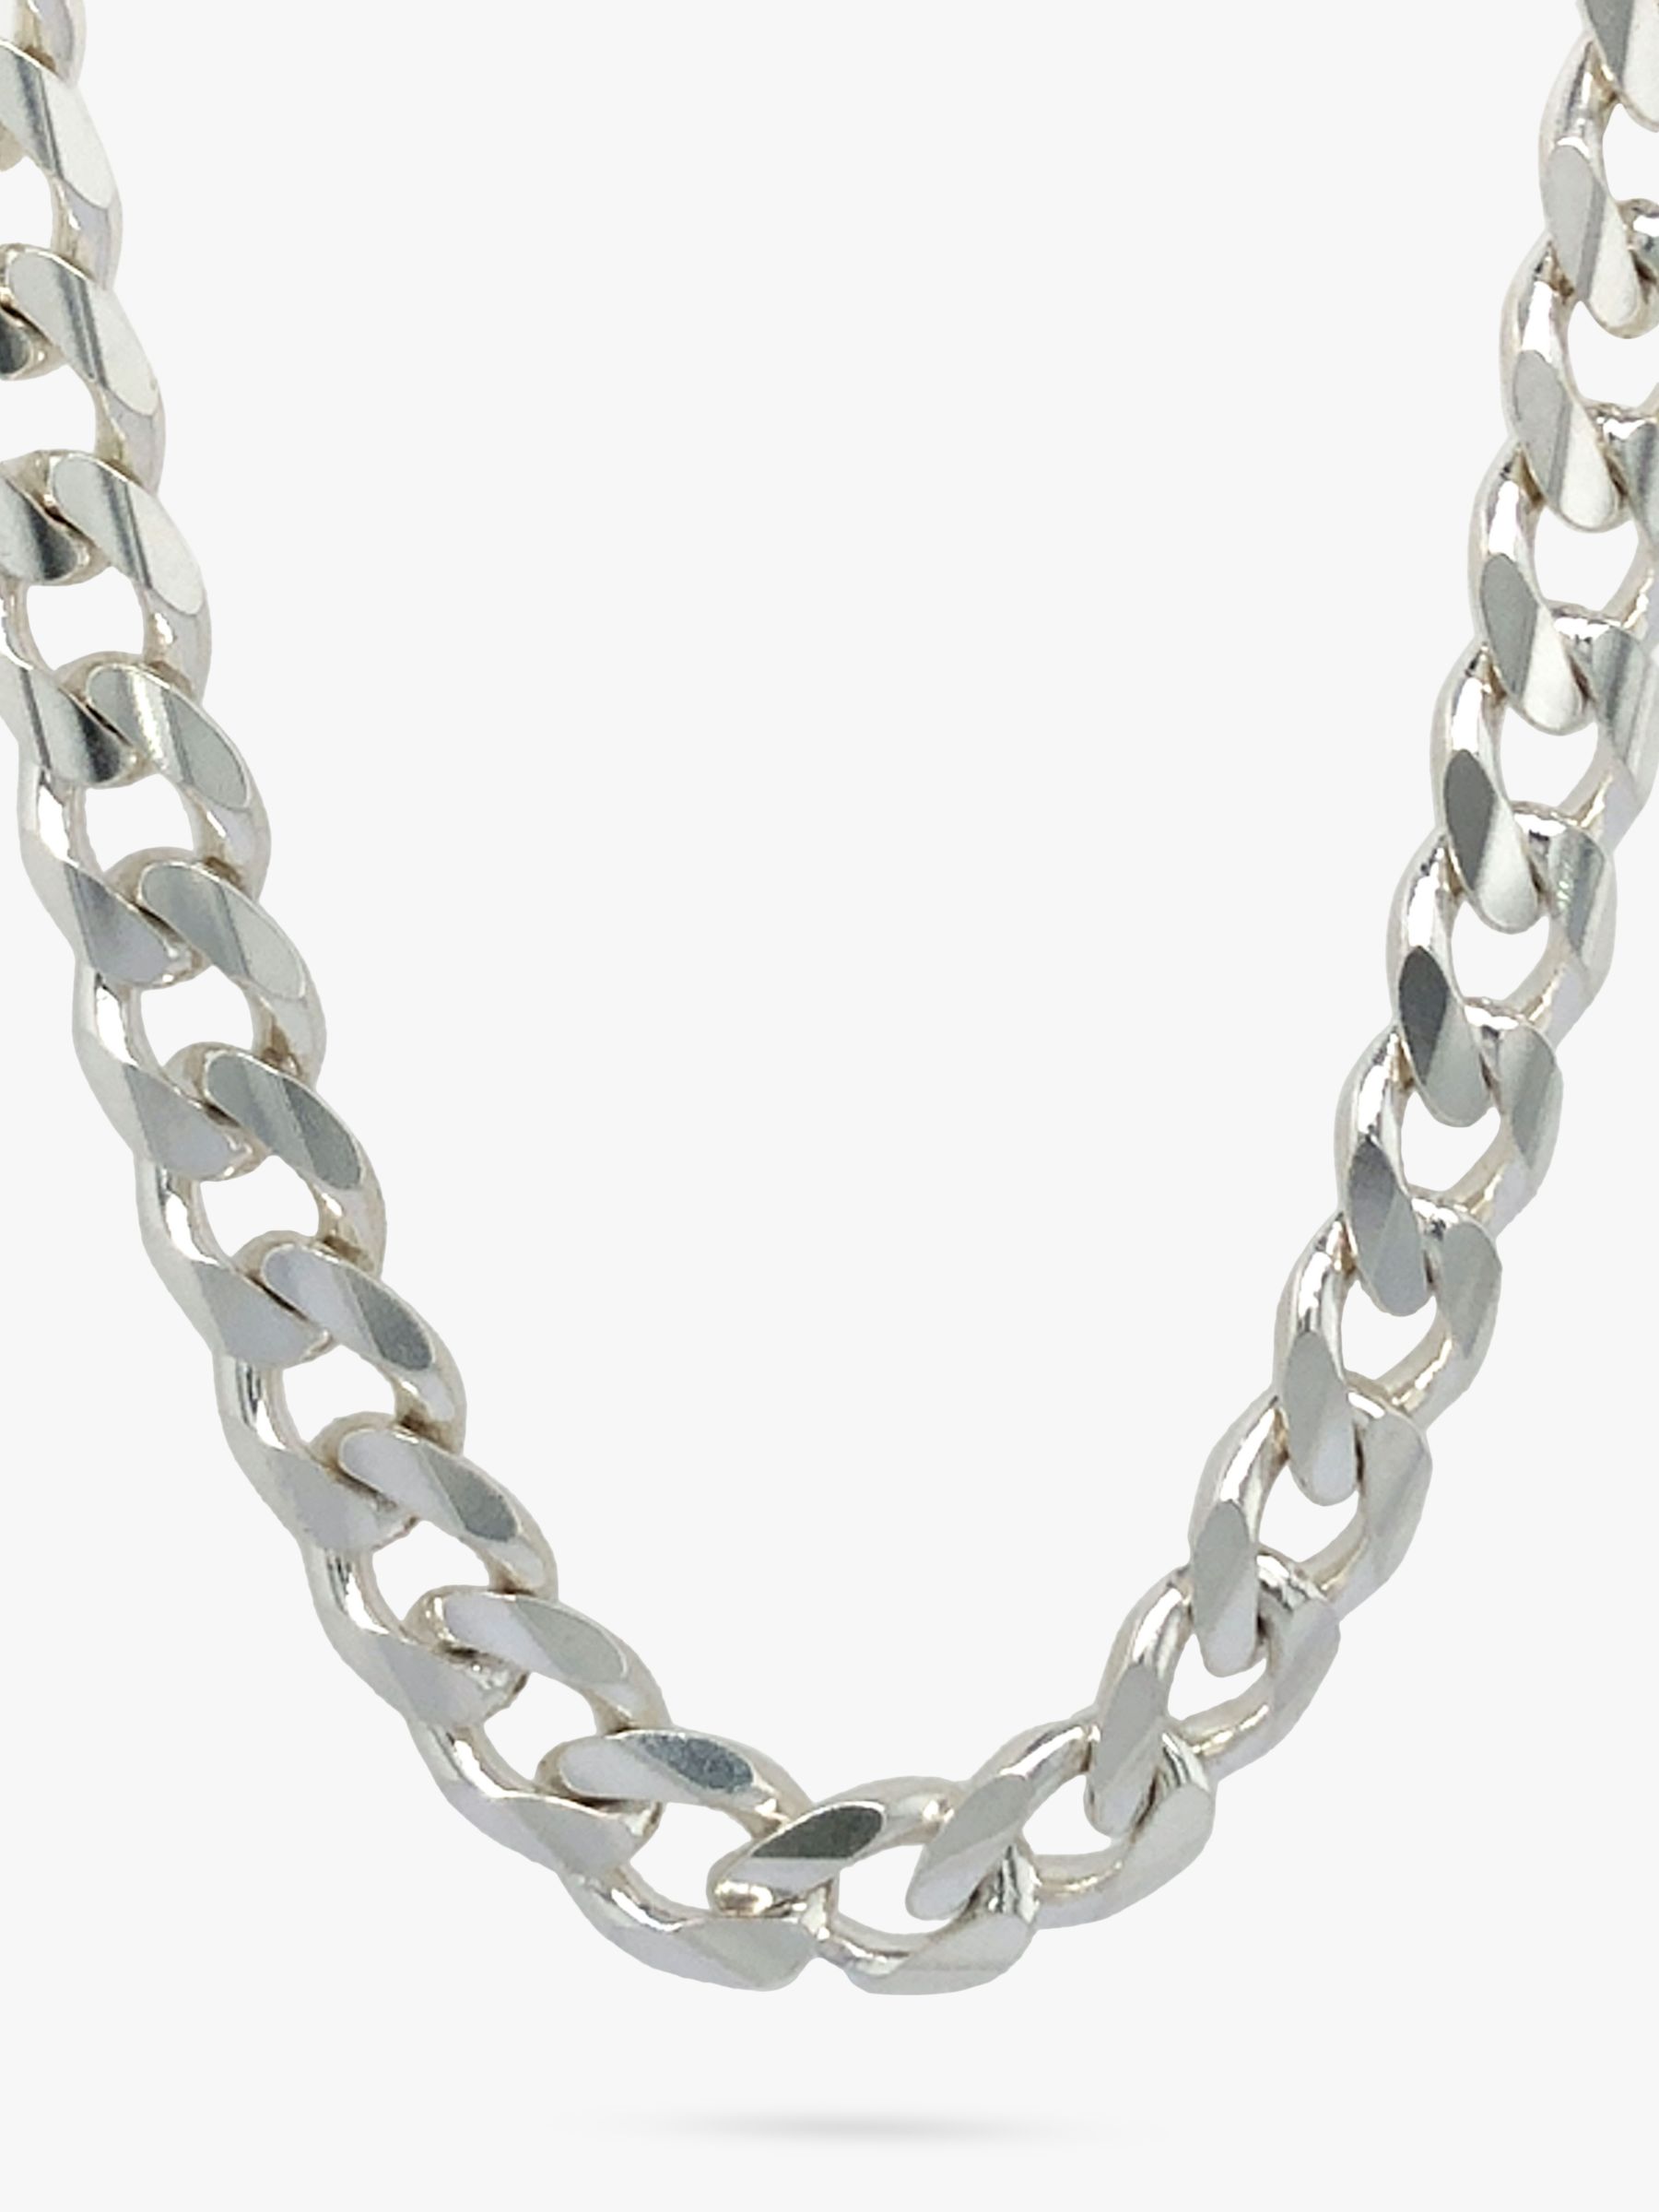 Buy Vintage Fine Jewellery Second Hand Curb Link Chain Necklace, Dated Circa 1980s Online at johnlewis.com